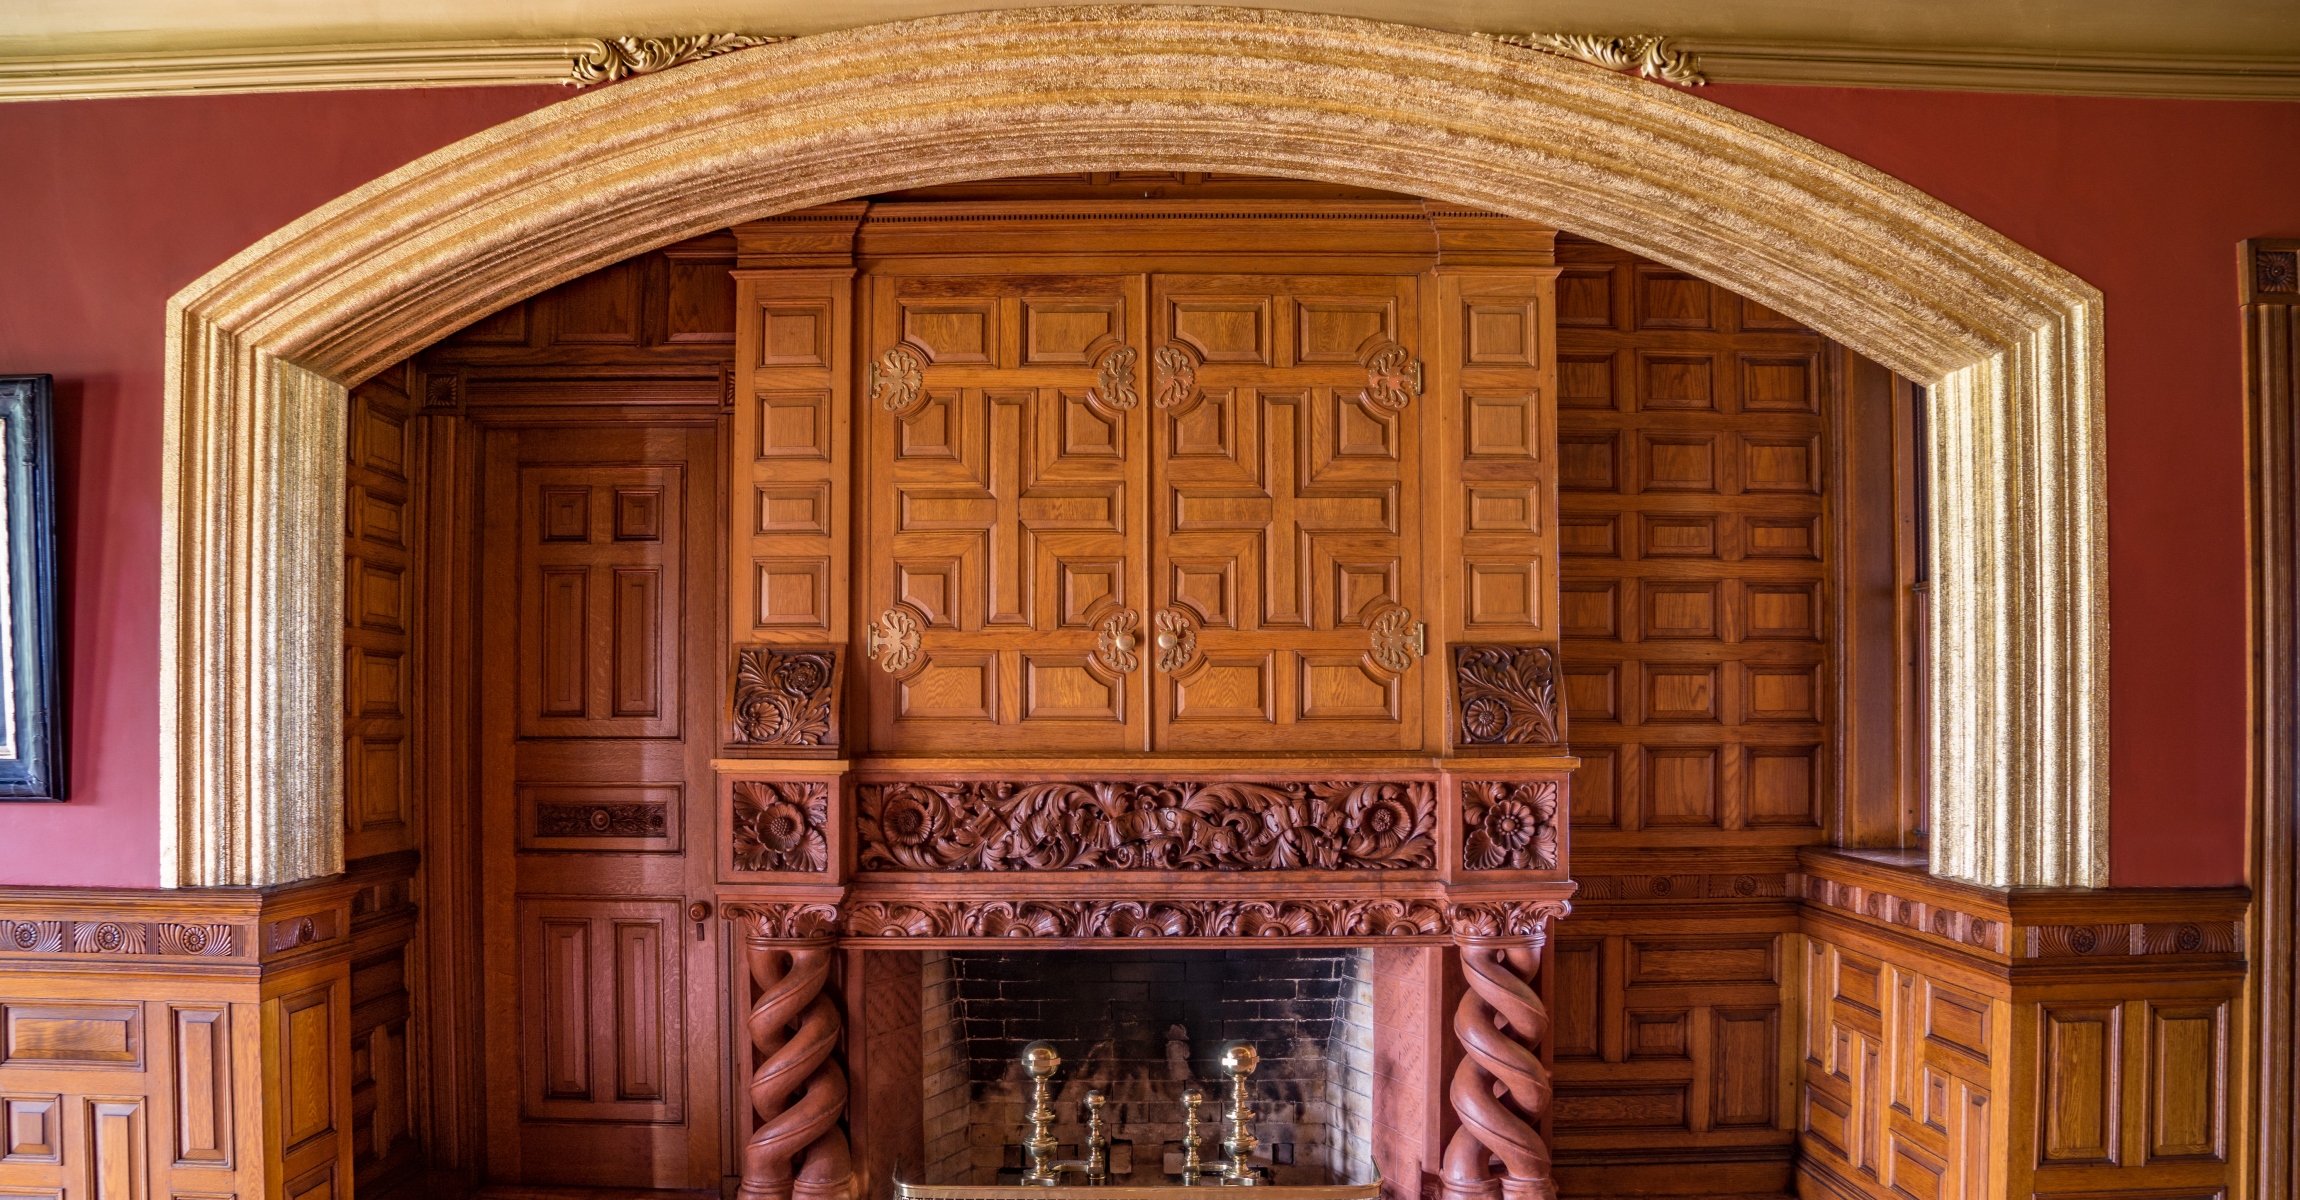 Large fireplace set into niche of a wood paneled room with brick red walls. There is a door to the left of the fireplace.